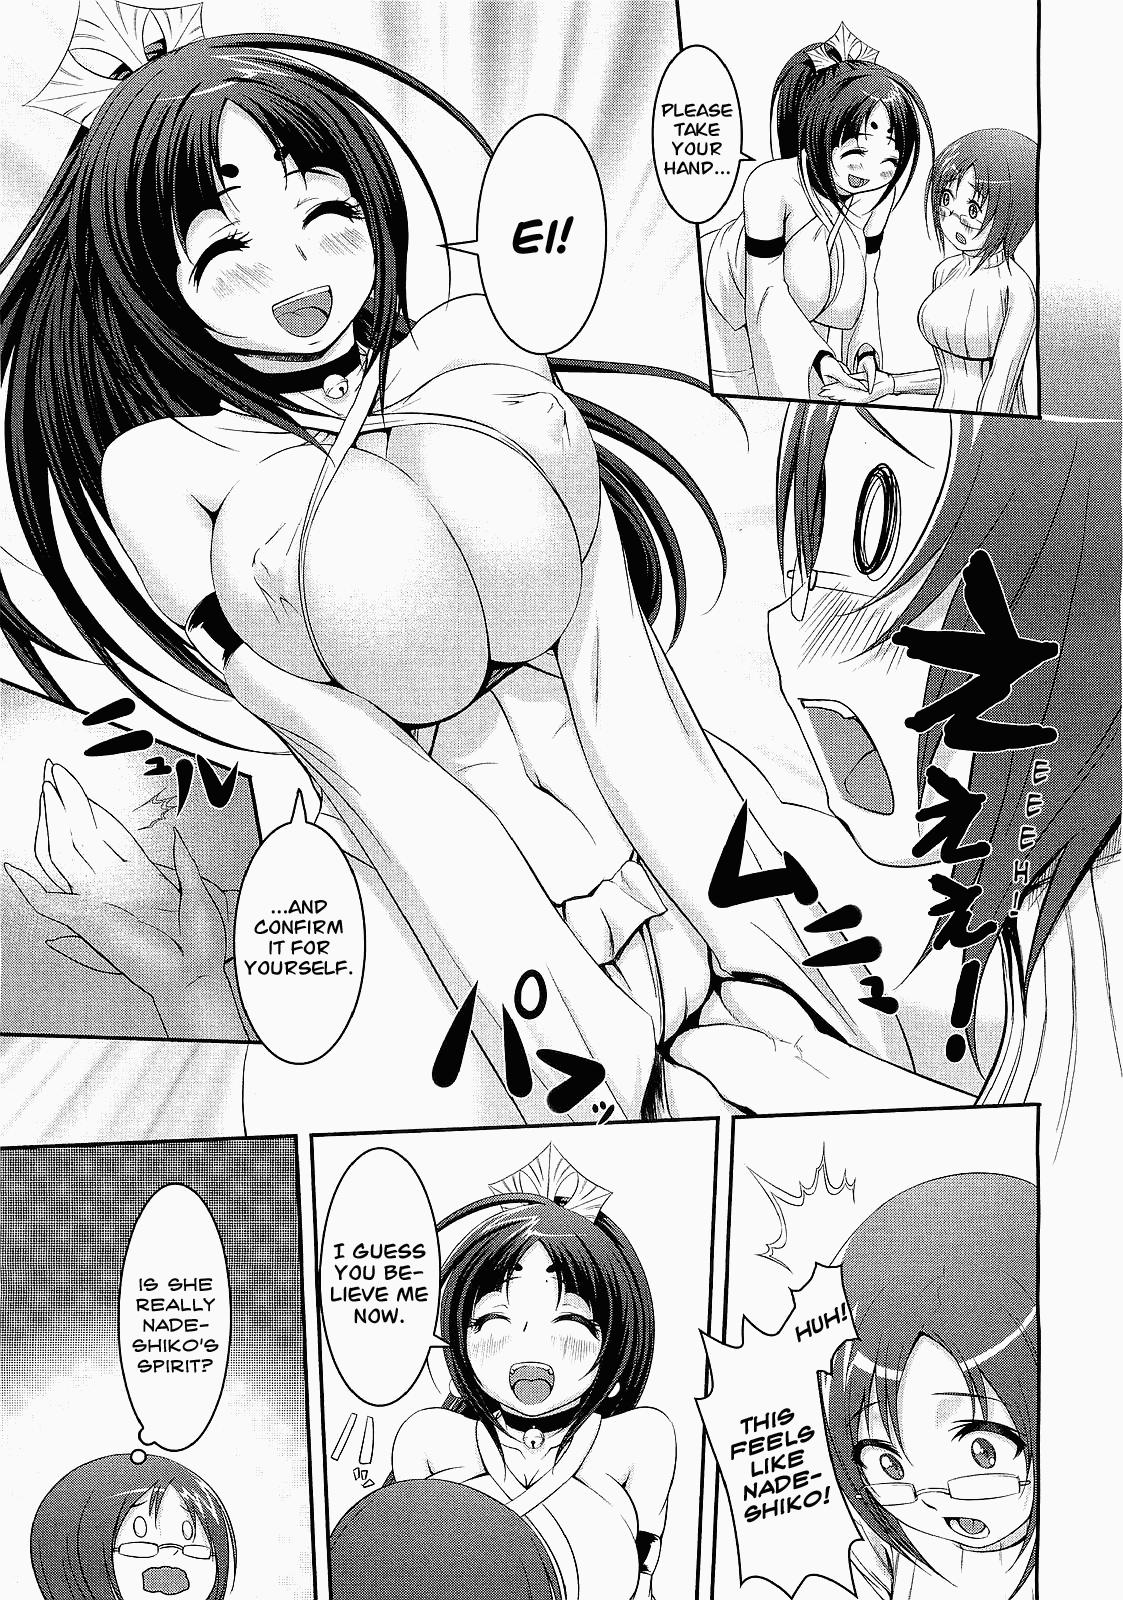 Naho of the Onahole 4